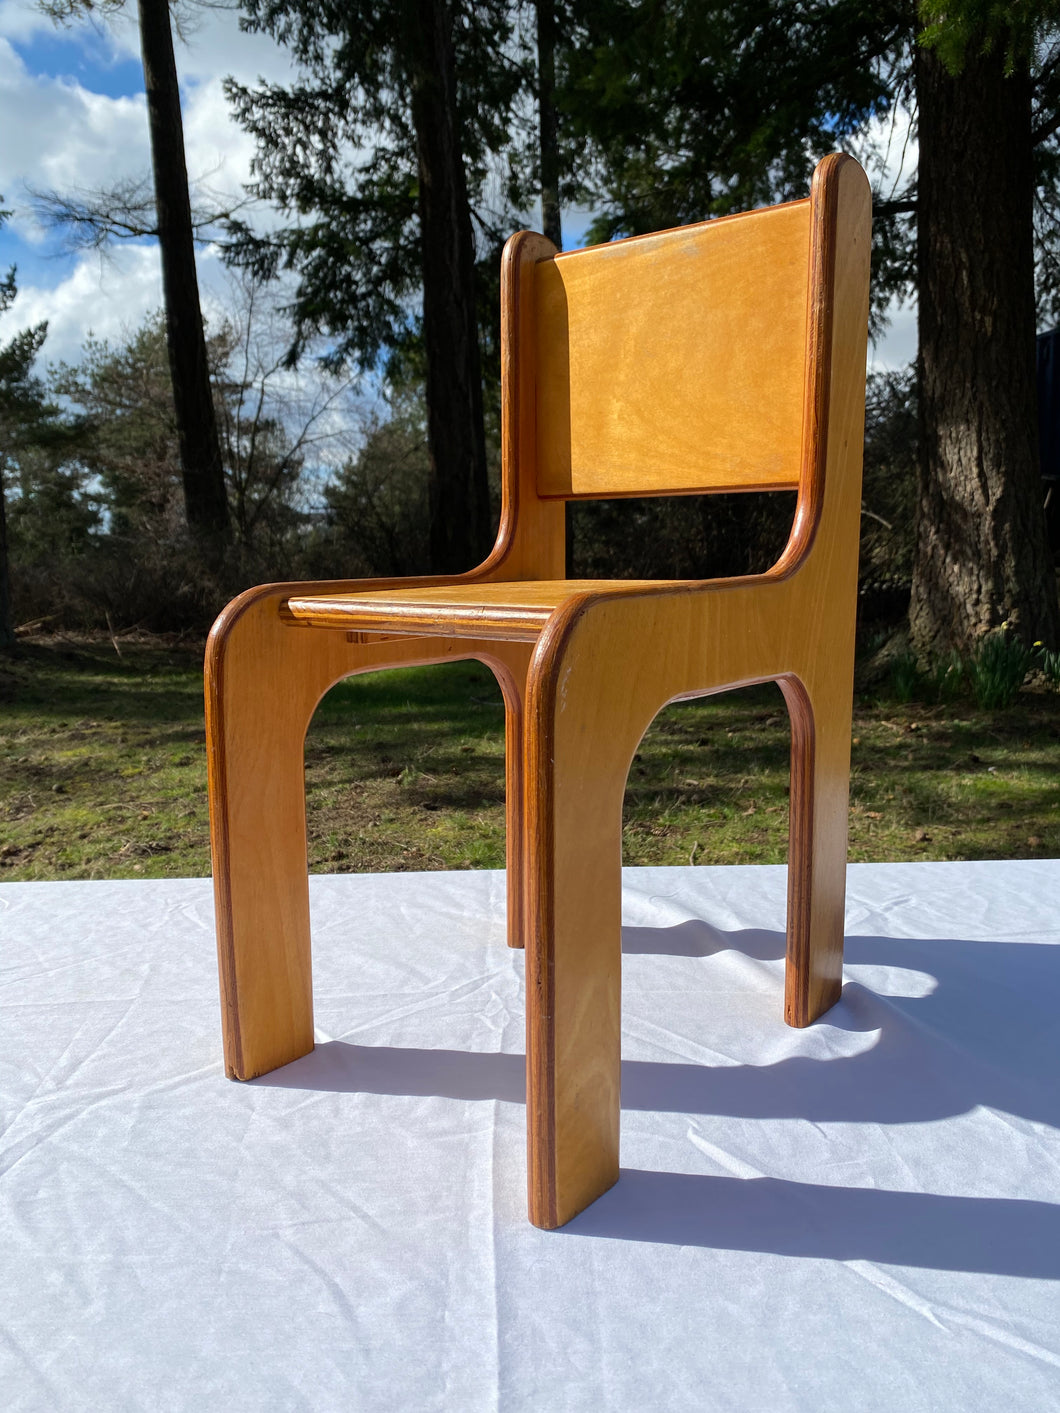 Wooden Chair #12: 11.5 Inches